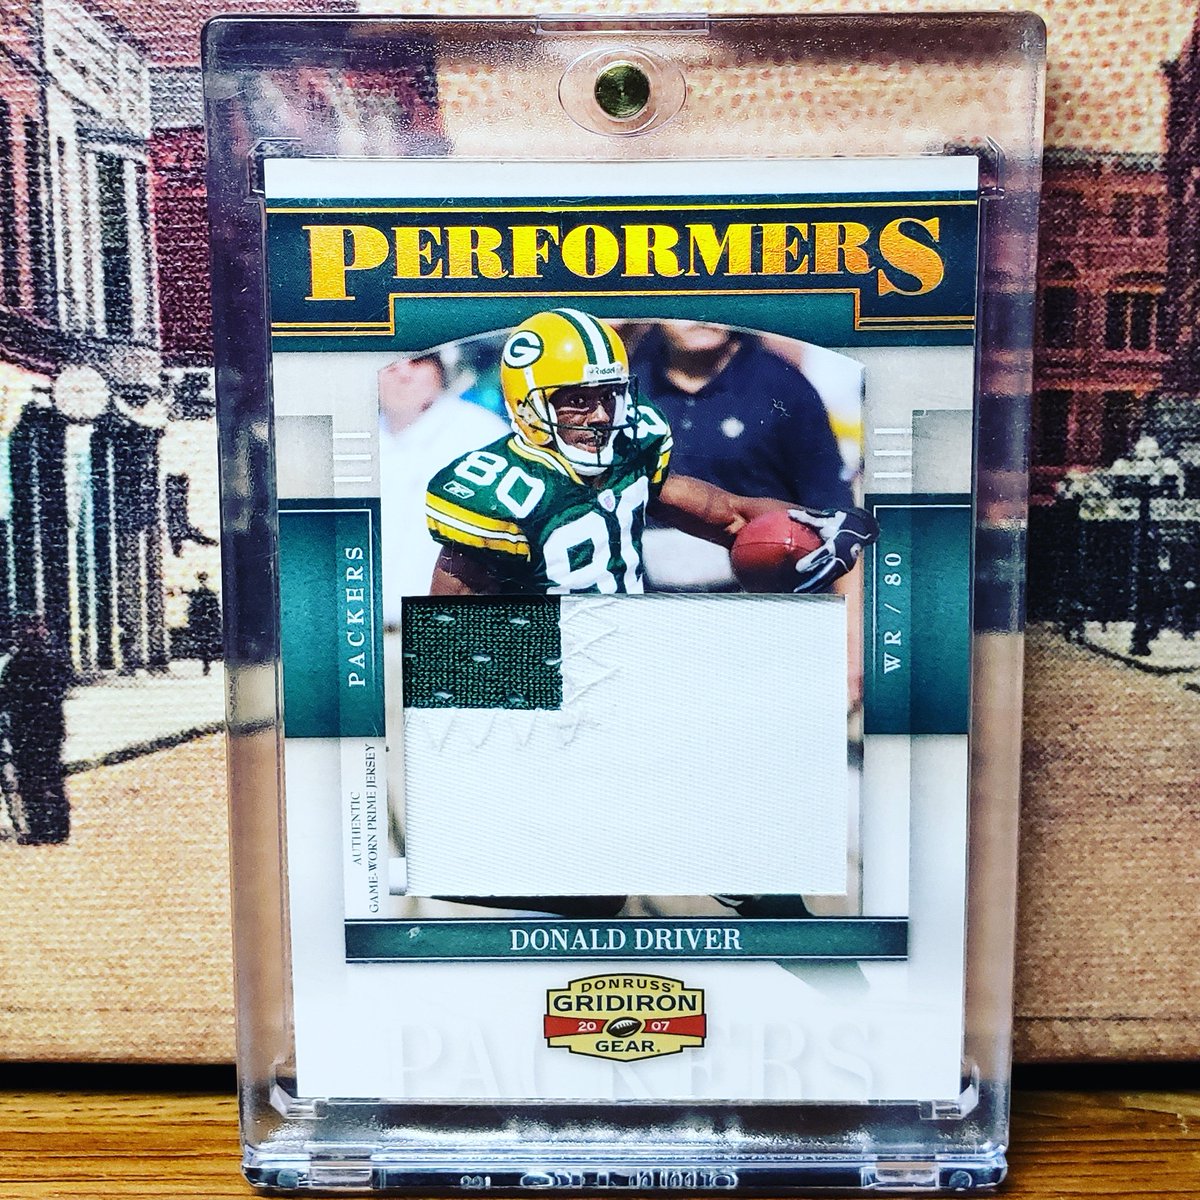 From the PC - 2007 Gridiron Gear Donald Driver Prime Game Used Chunky Patch!! #donalddriver #greenbaypackers #gridirongear #gameworn #gameused #thehobby #footballcards